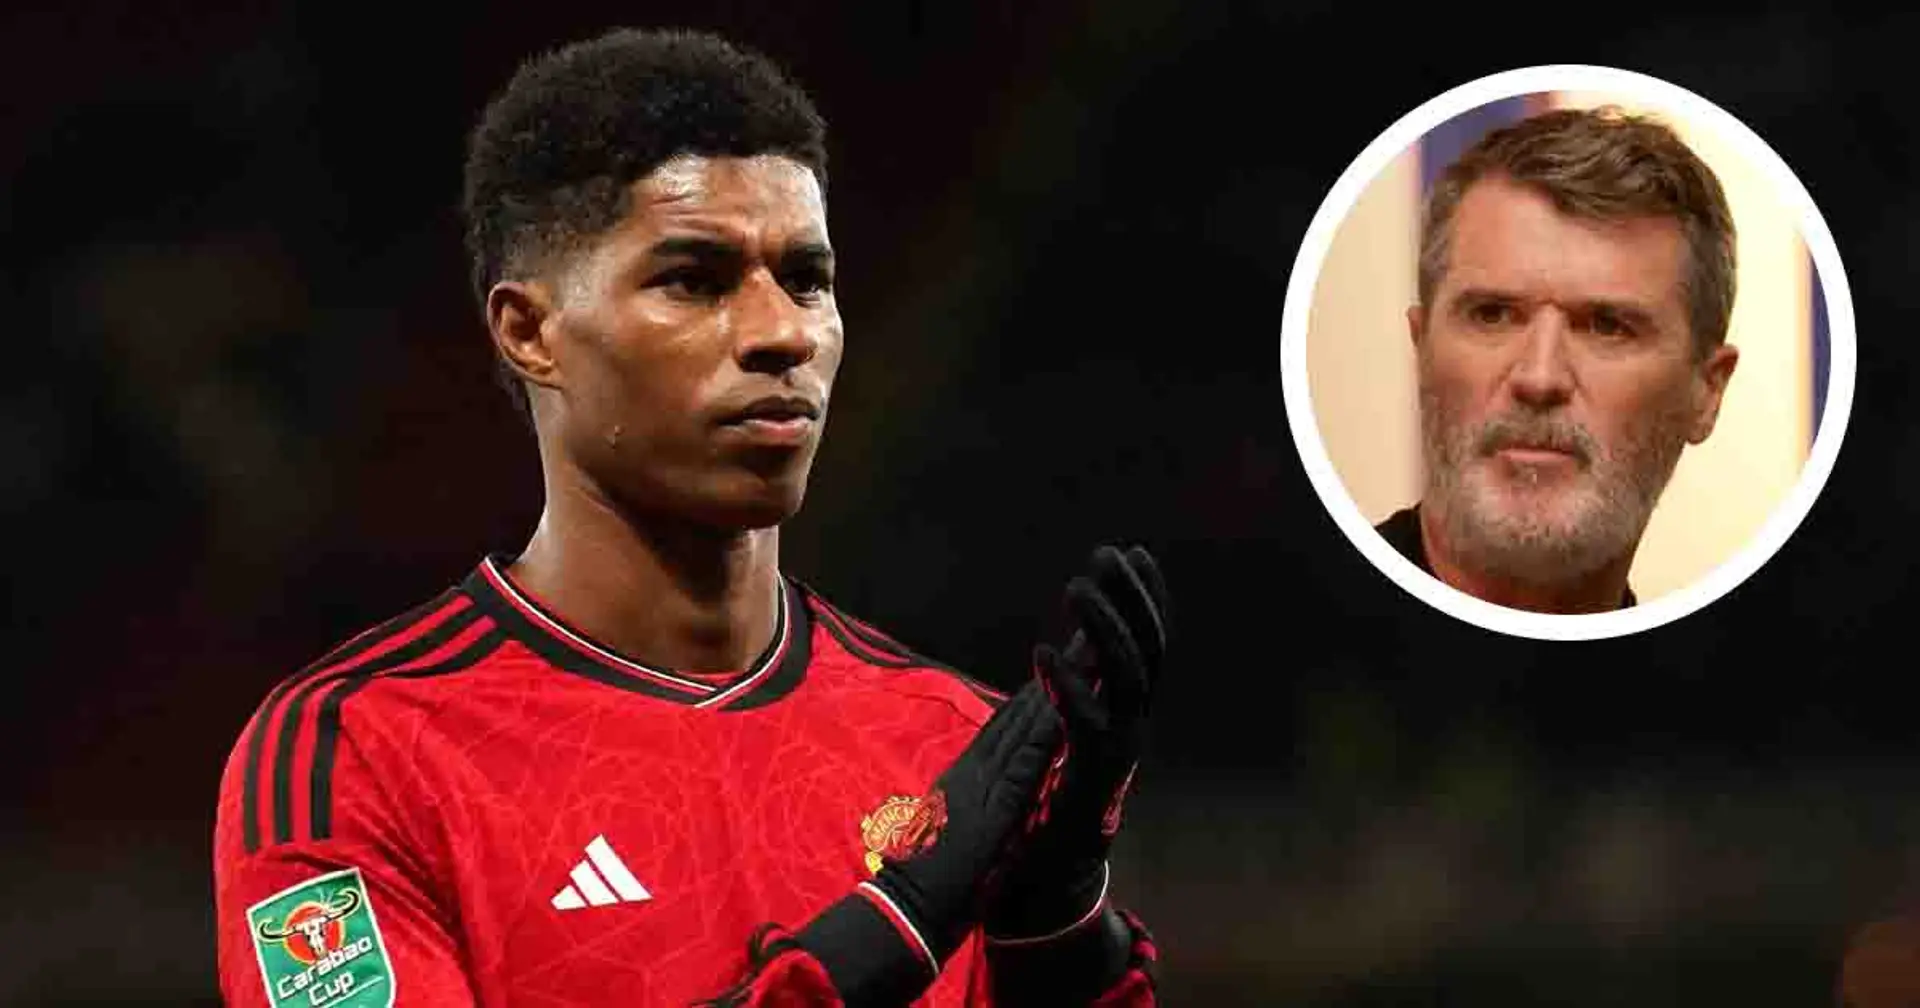 'I've had some of my best drinking sessions after defeat': Roy Keane defends Rashford for partying after Man City loss